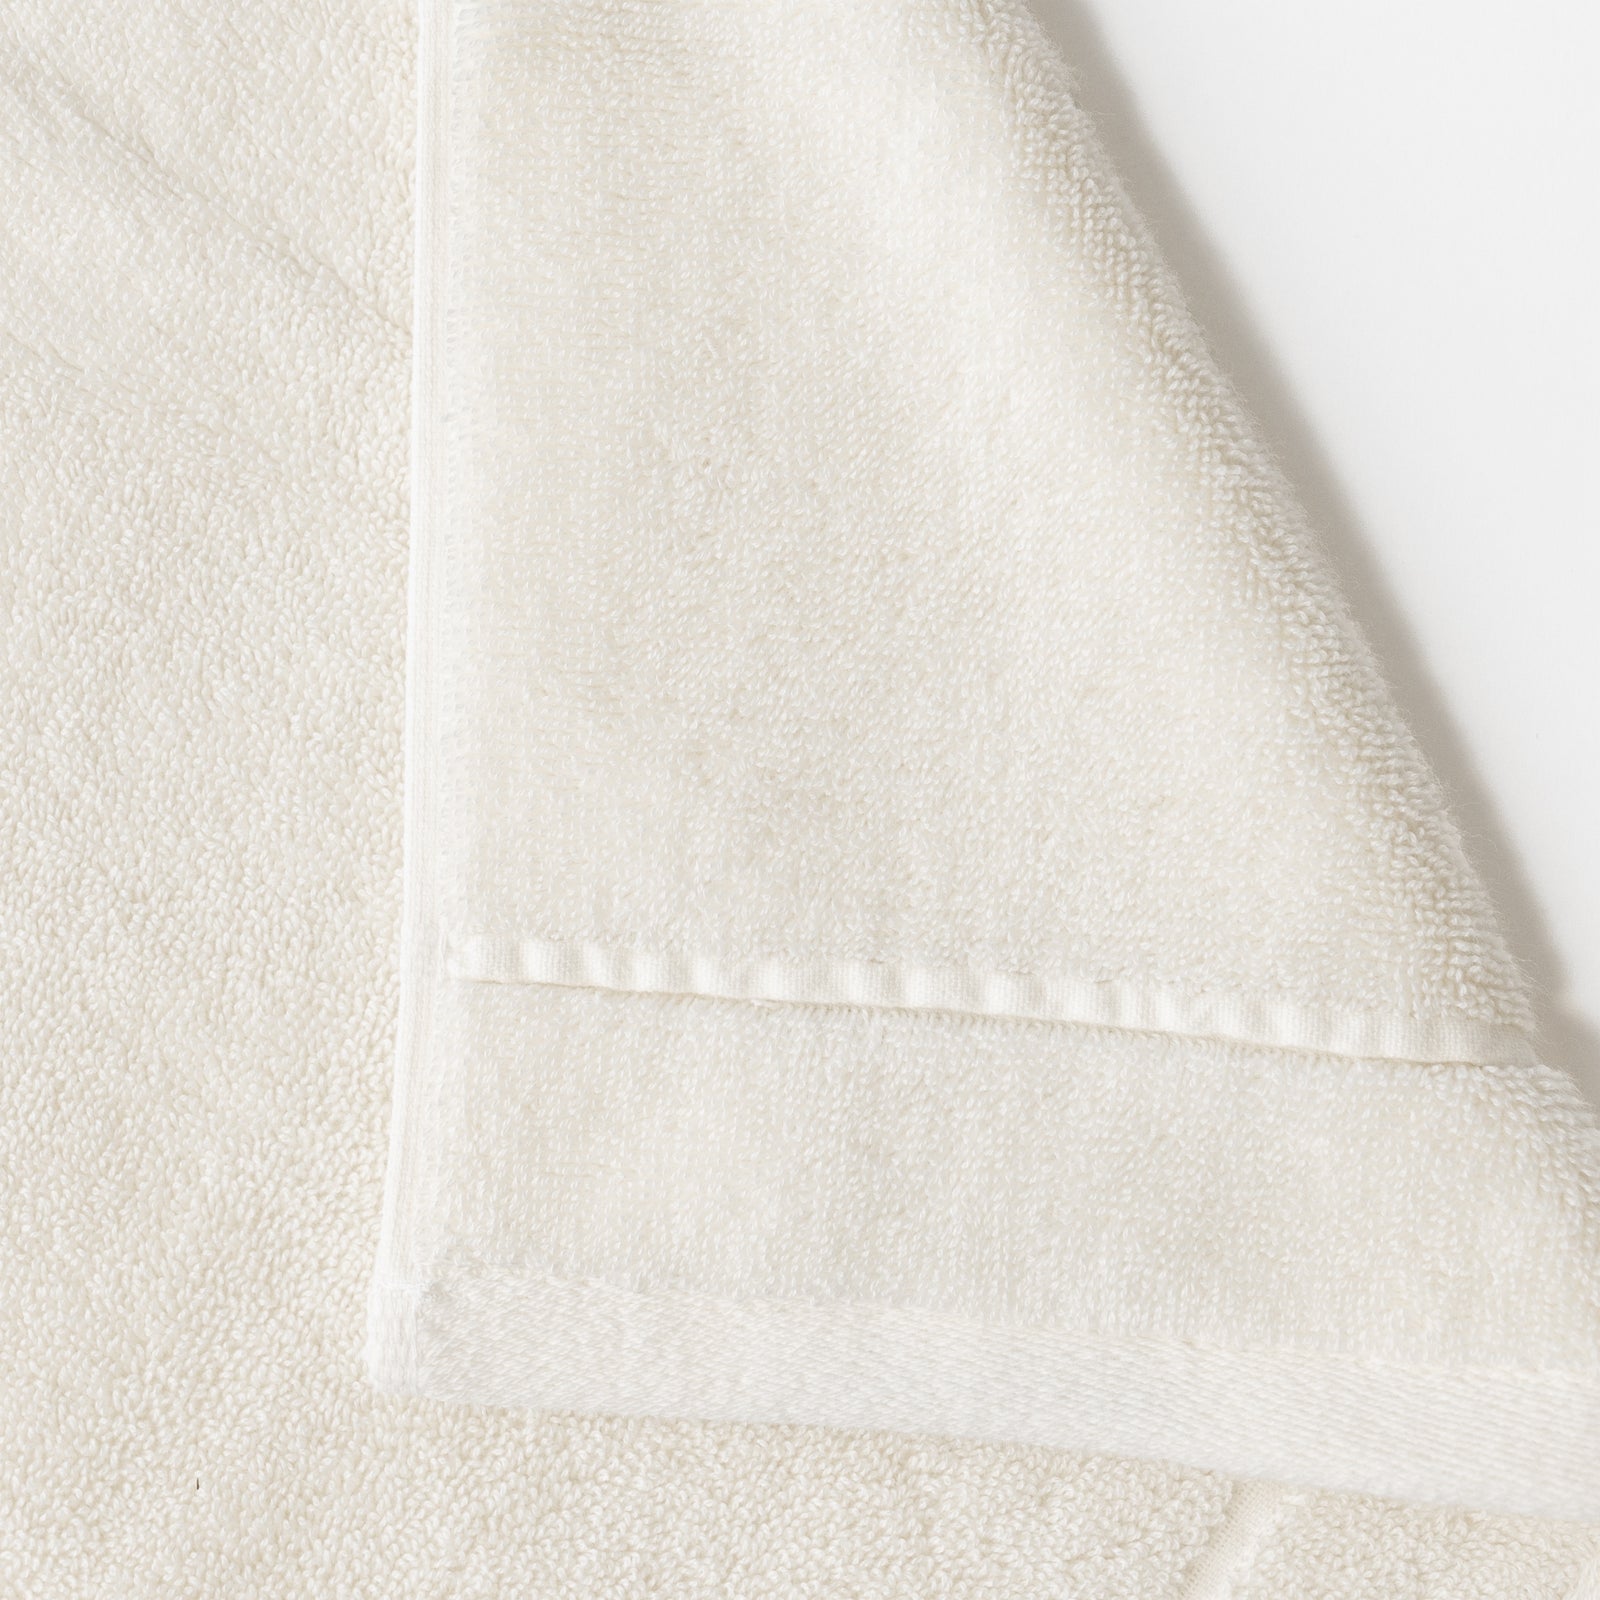 Creme Premium Plush Bath Towel. Photo of Premium Plush Bath Towels taken on a white background showing only the corner of the towel. 